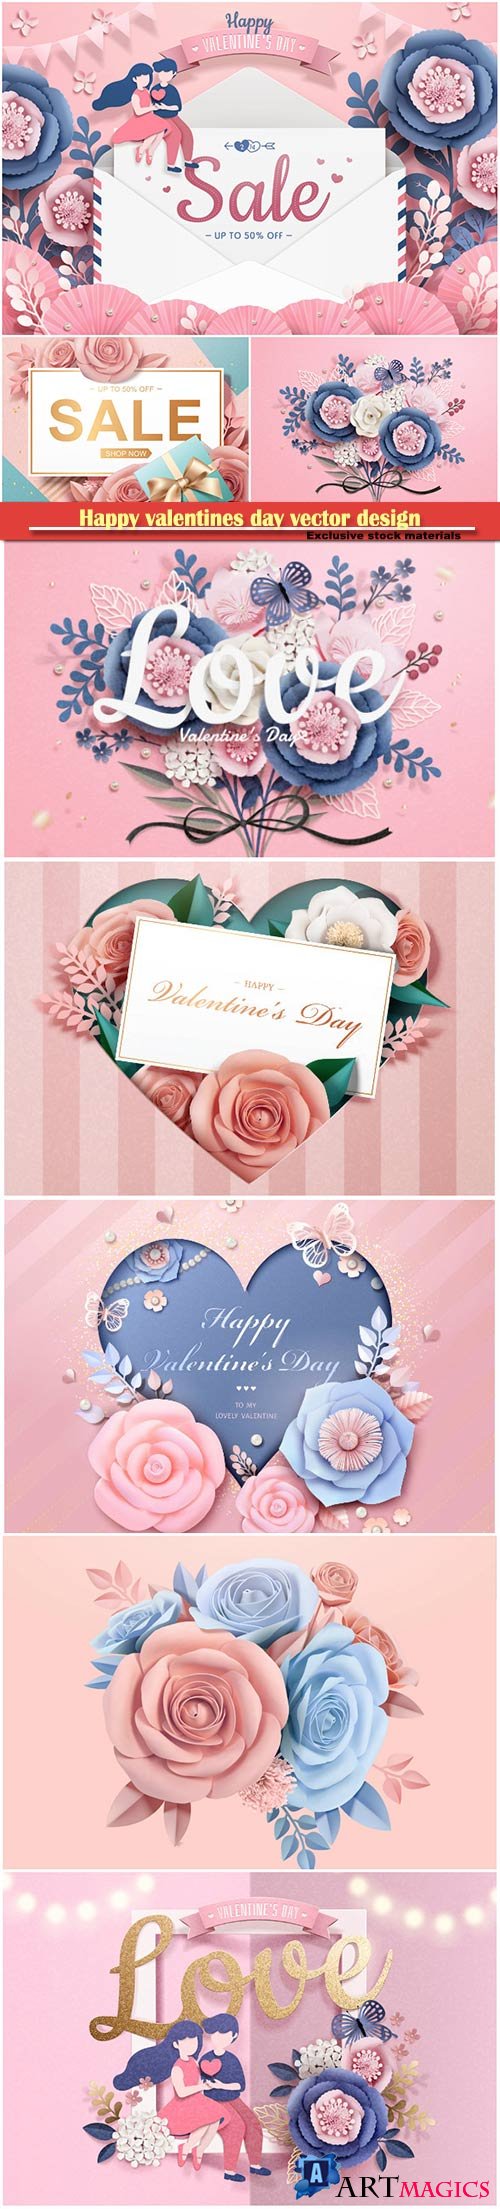 Happy valentines day vector design with heart, balloons, roses in 3d illustration # 8